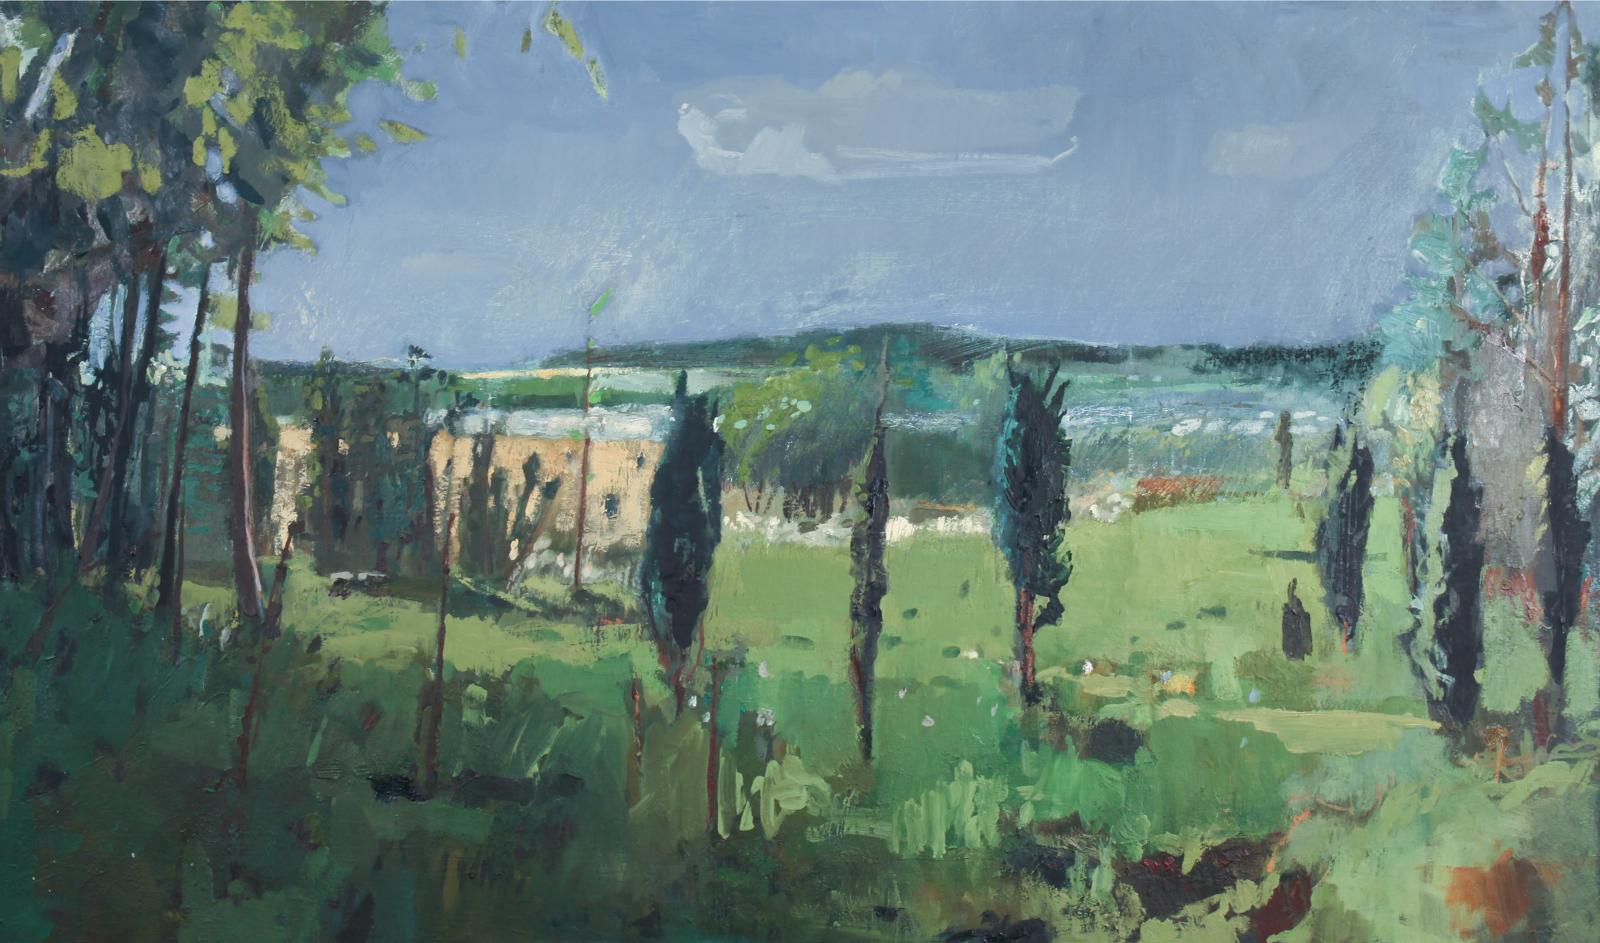 Sara Macculloch (1967) - View To Marshlands, 1998